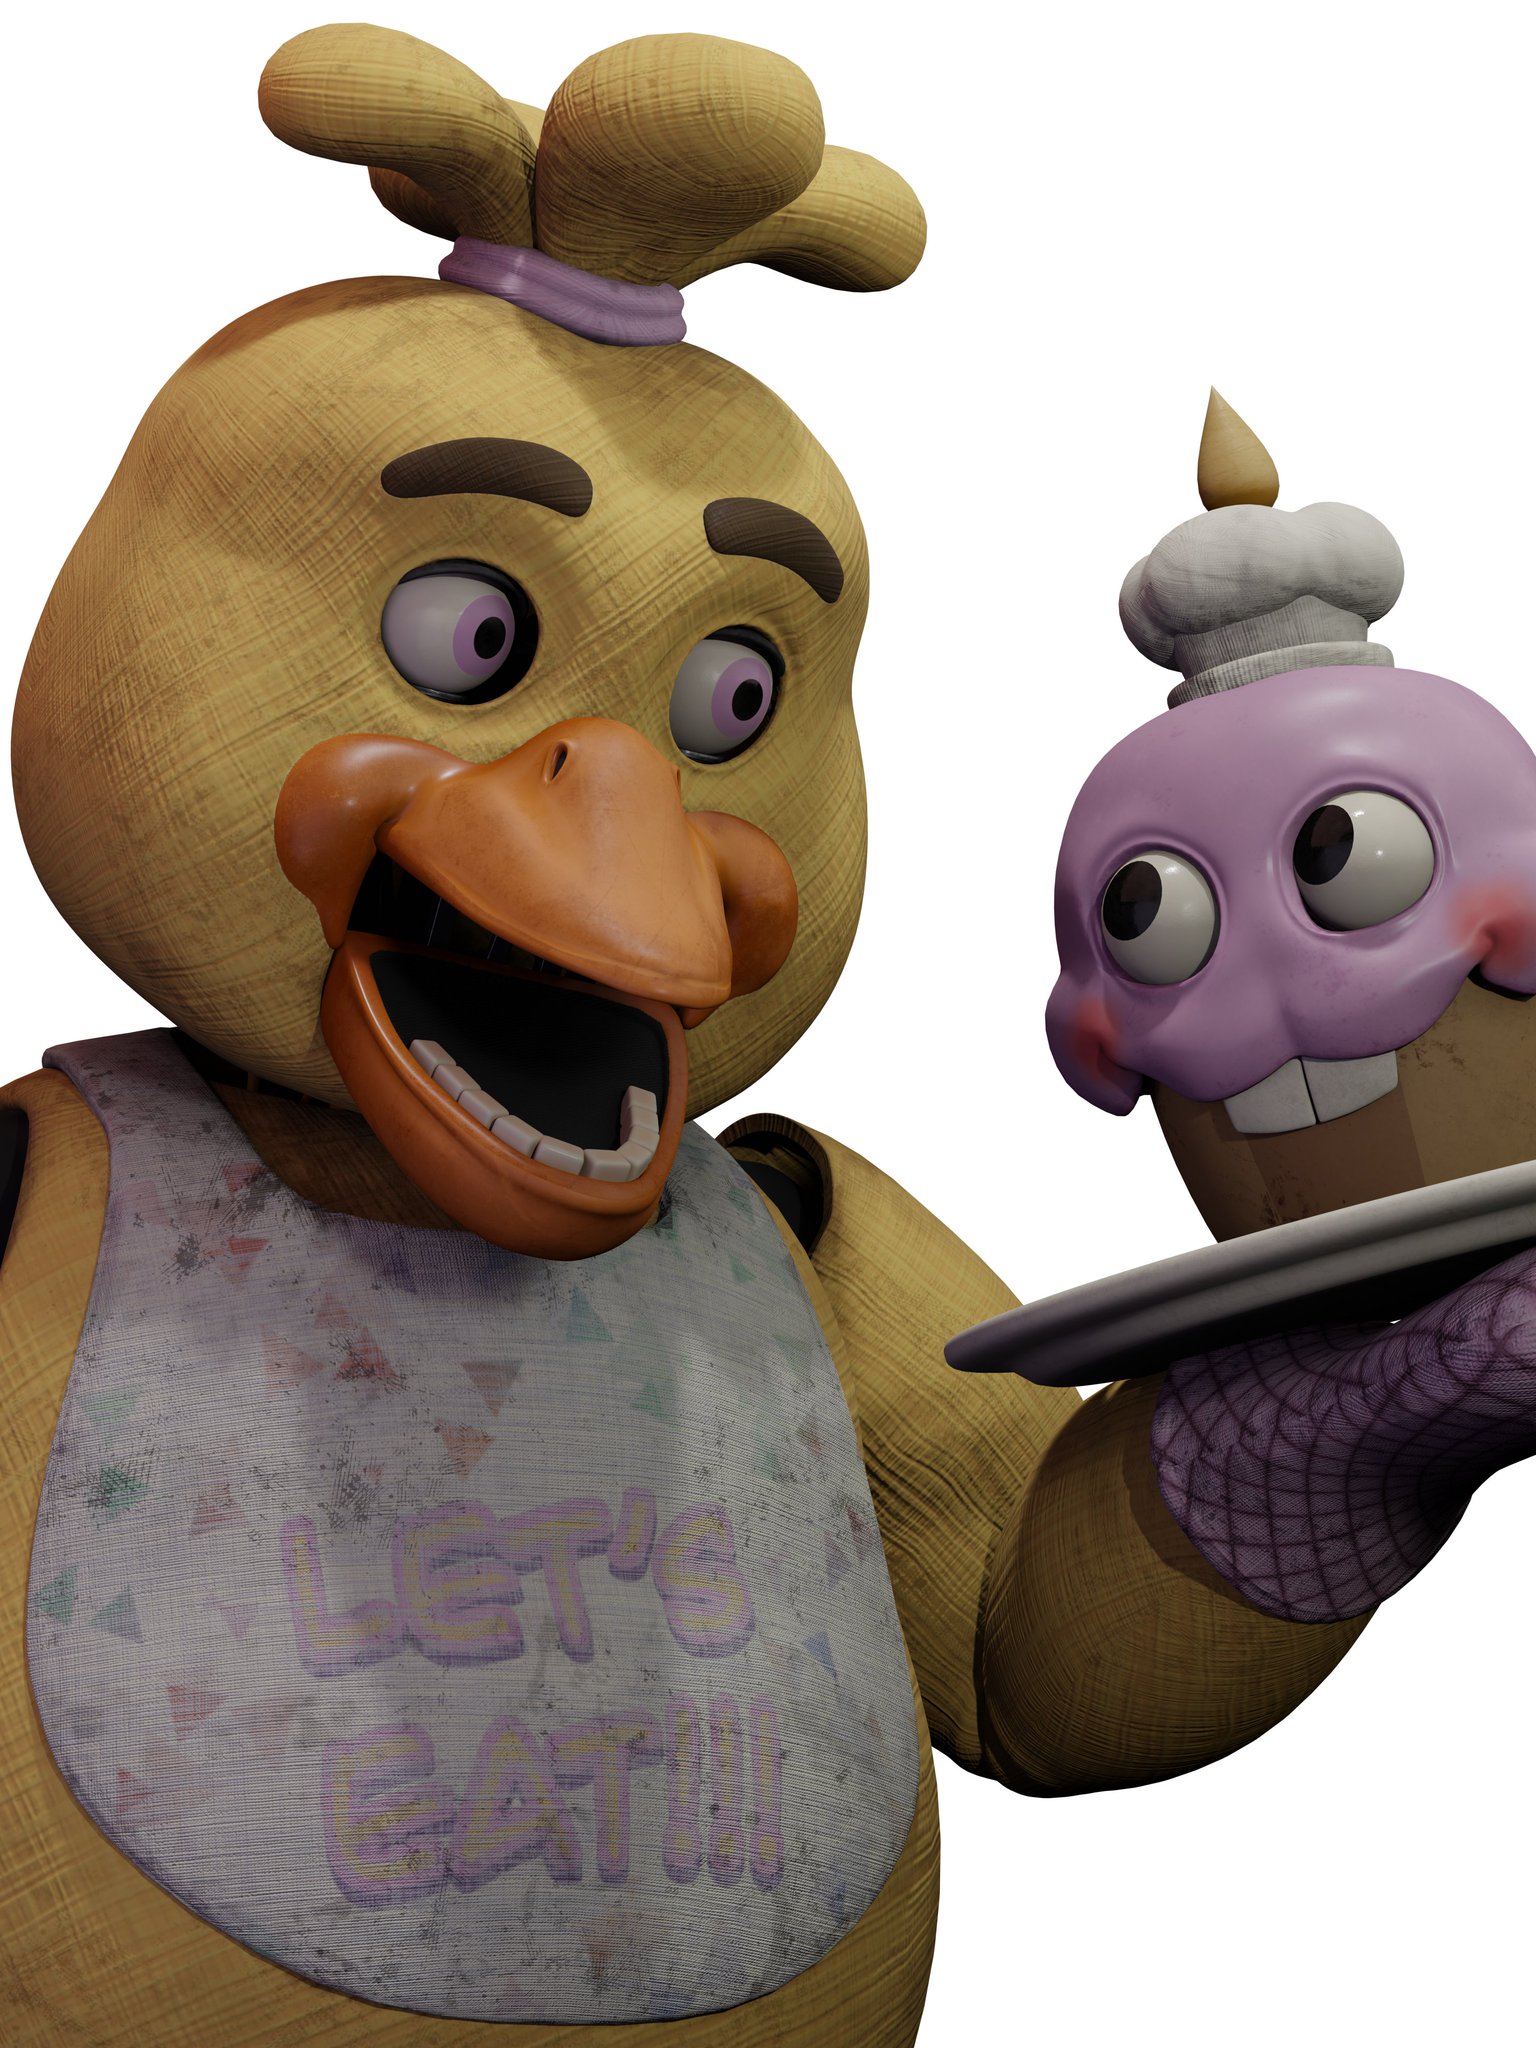 happy anniversary fnaf!! to celebrate, here's a look at stylized withered  chica and foxy : r/fivenightsatfreddys